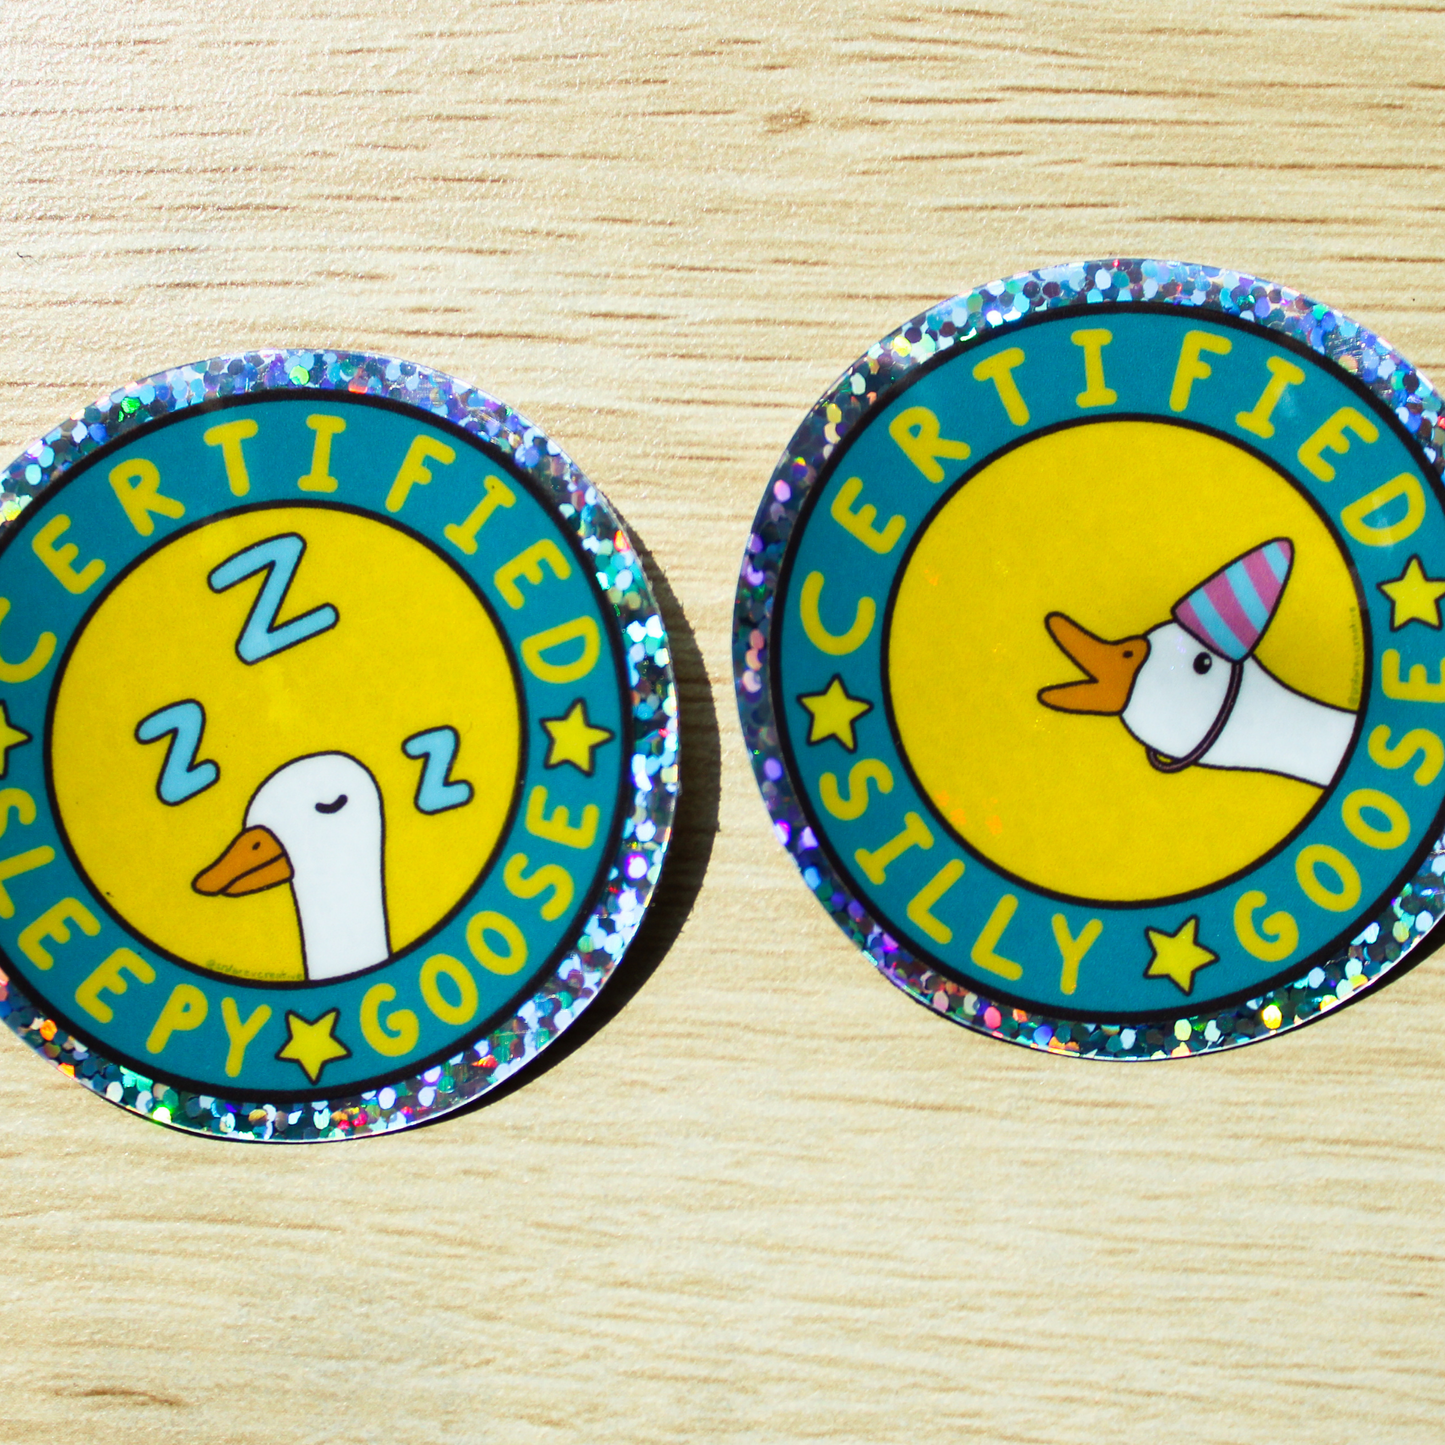 Two holographic circle glitter stickers are on a wood background. One with Certified Silly Goose Sticker written in a circle with stars in between the words. A goose with a blue and pink party hat is popping out on a yellow background. The other with Certified Sleepy Goose written in a circle with stars and a white goose with Z's sleeping on a yellow background.